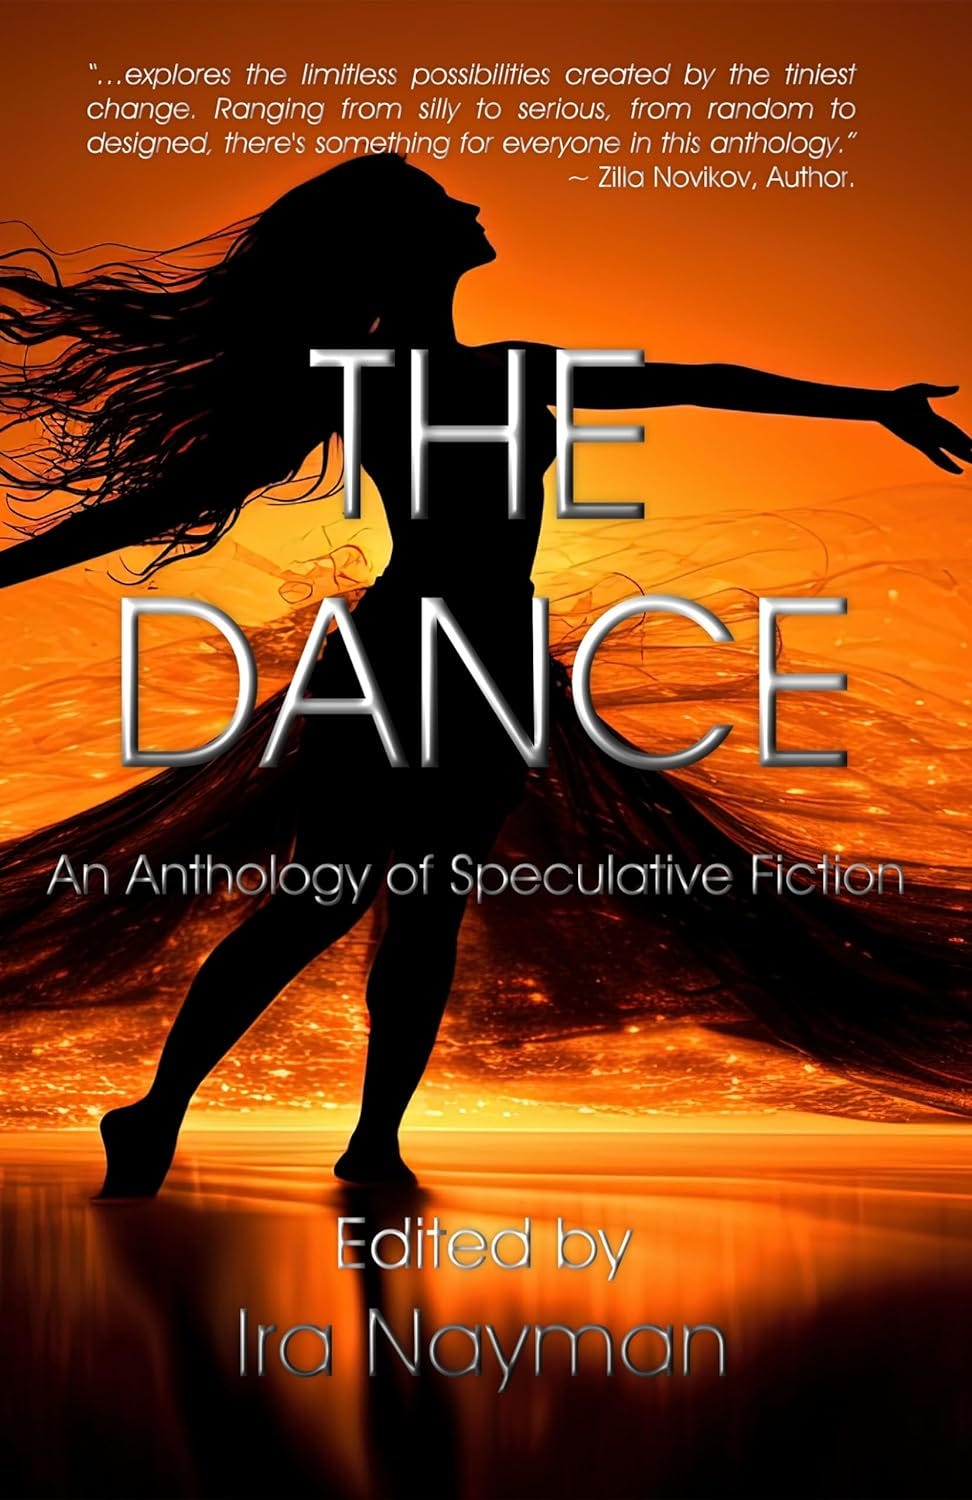 The Dance: An Anthology of Speculative Fiction, edited by Ira Nayman. There's a woman dancing on the beach. Rachel low-key wants you to know that she had nothing to do with this cover.